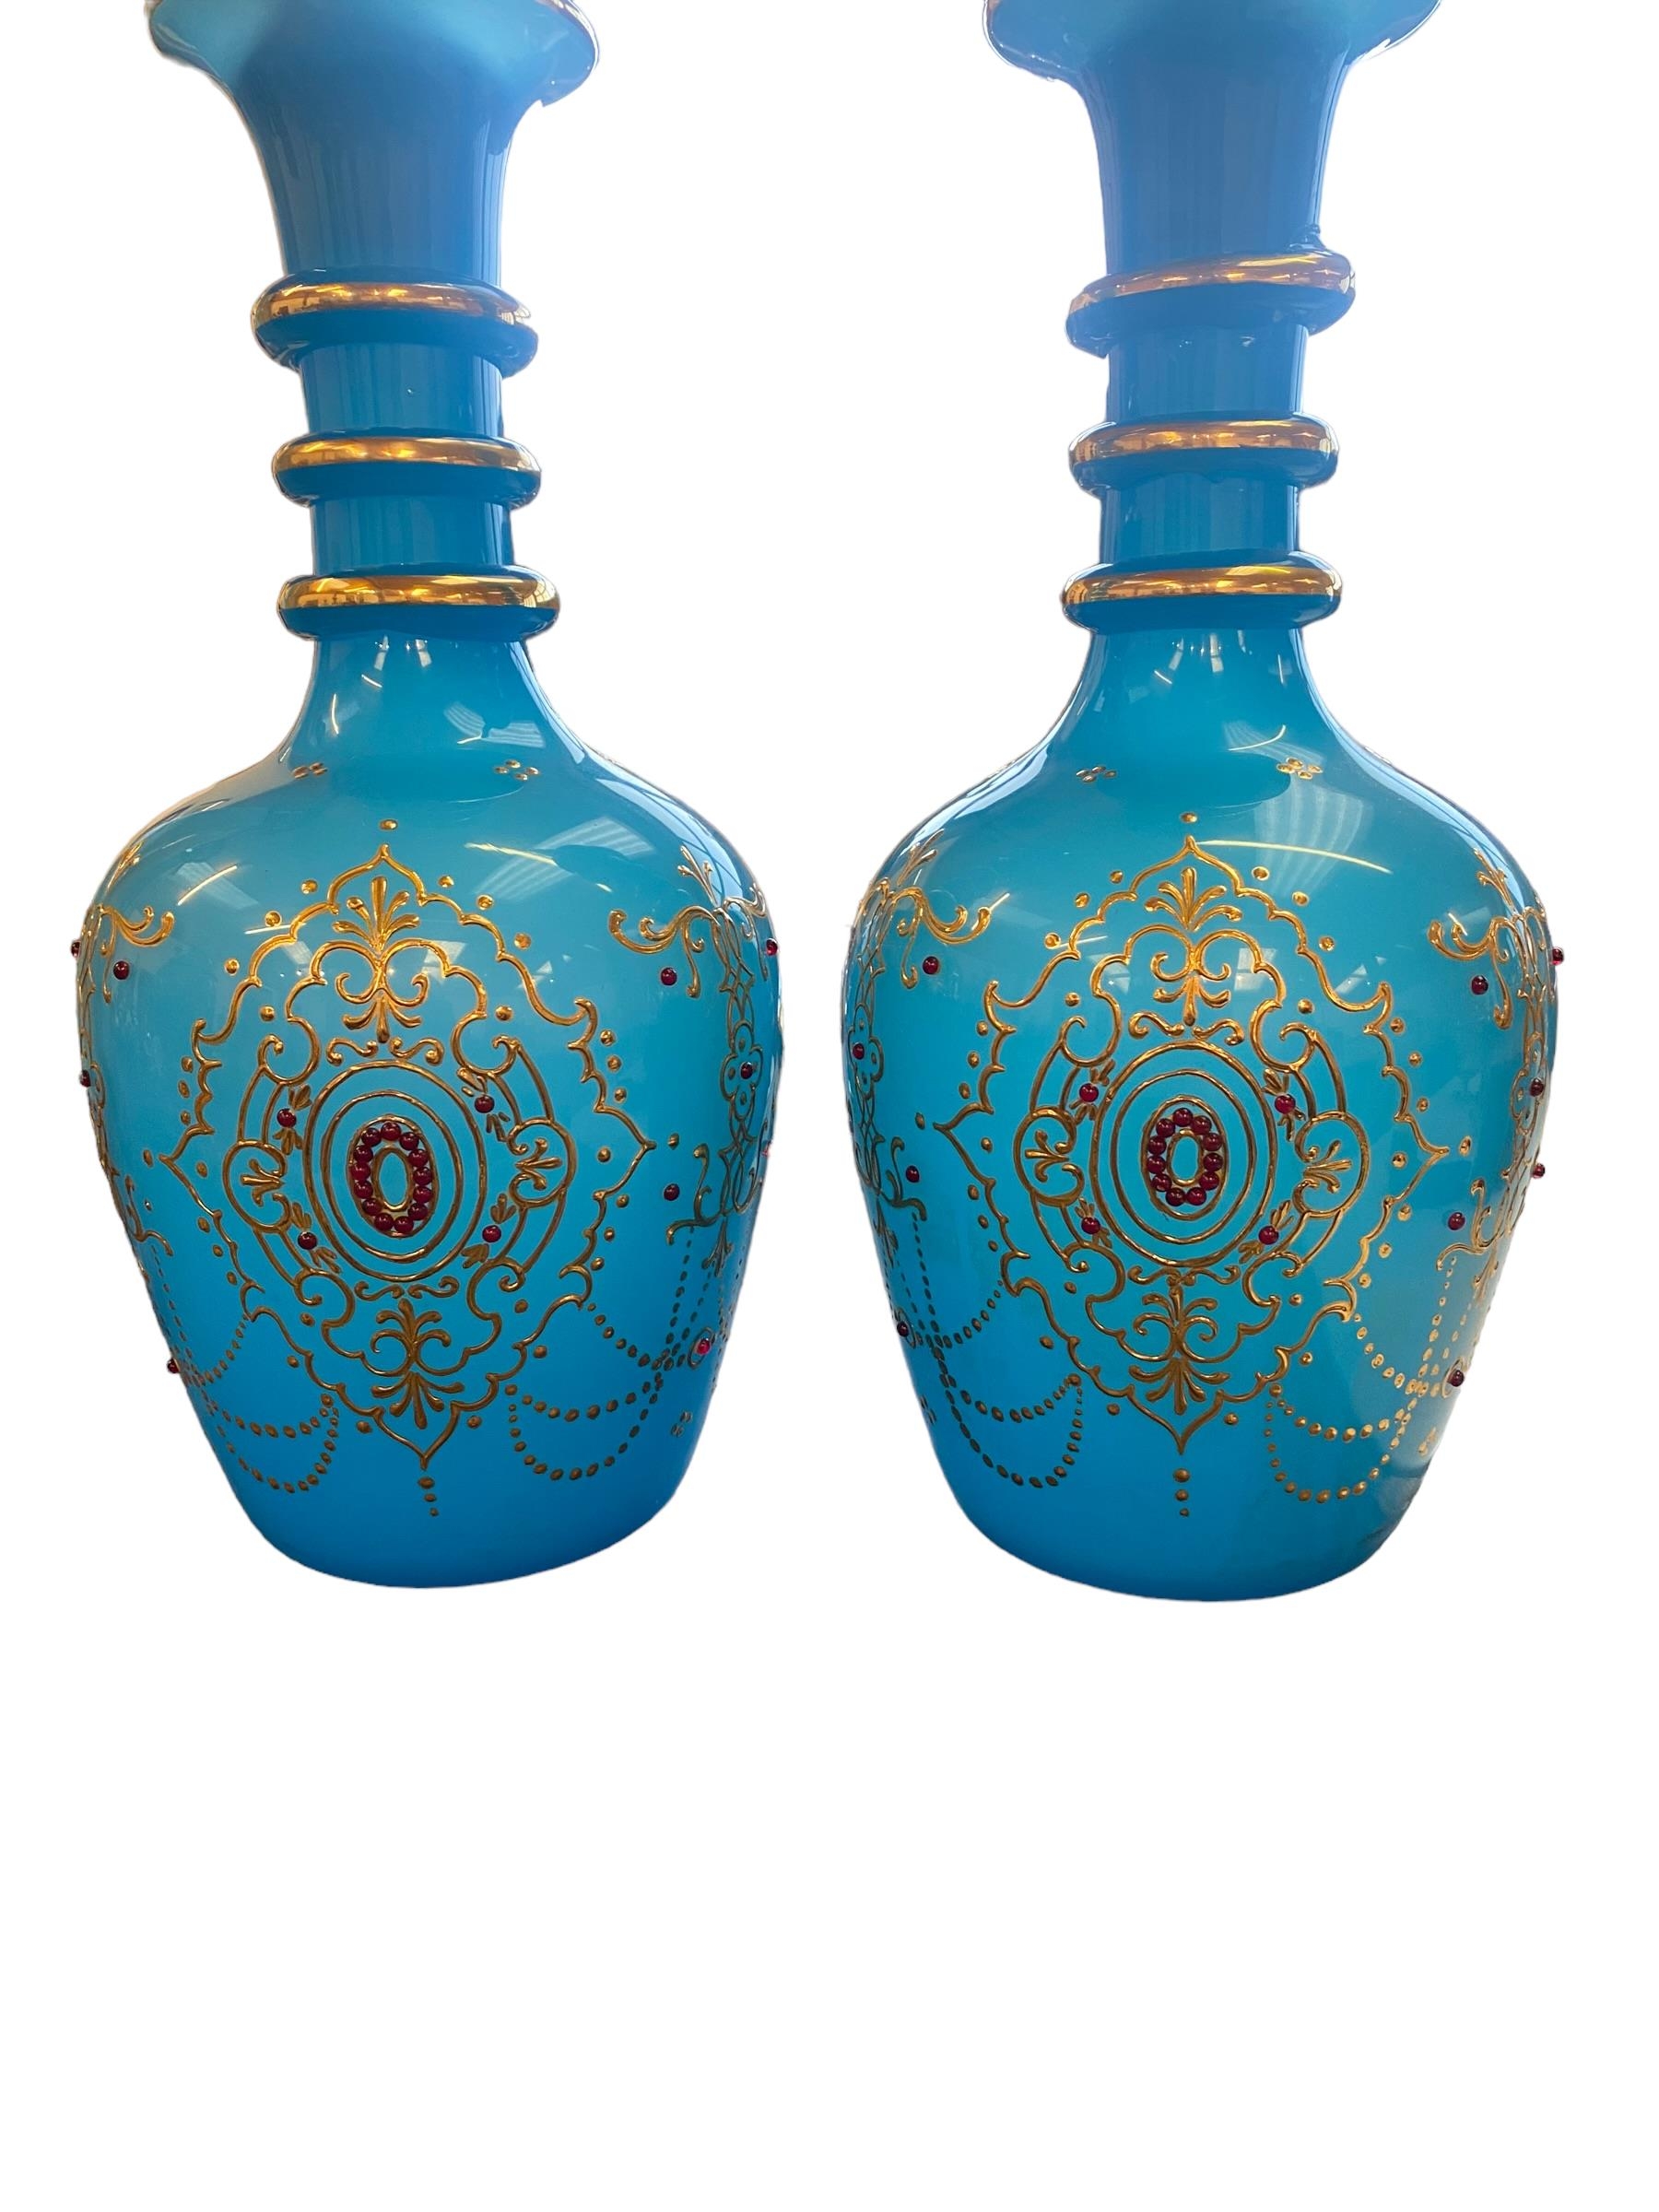 Pair of bohemian opague blue and gilt lidded vases with red jewelled enamel decoration 59 cm H - Image 2 of 3